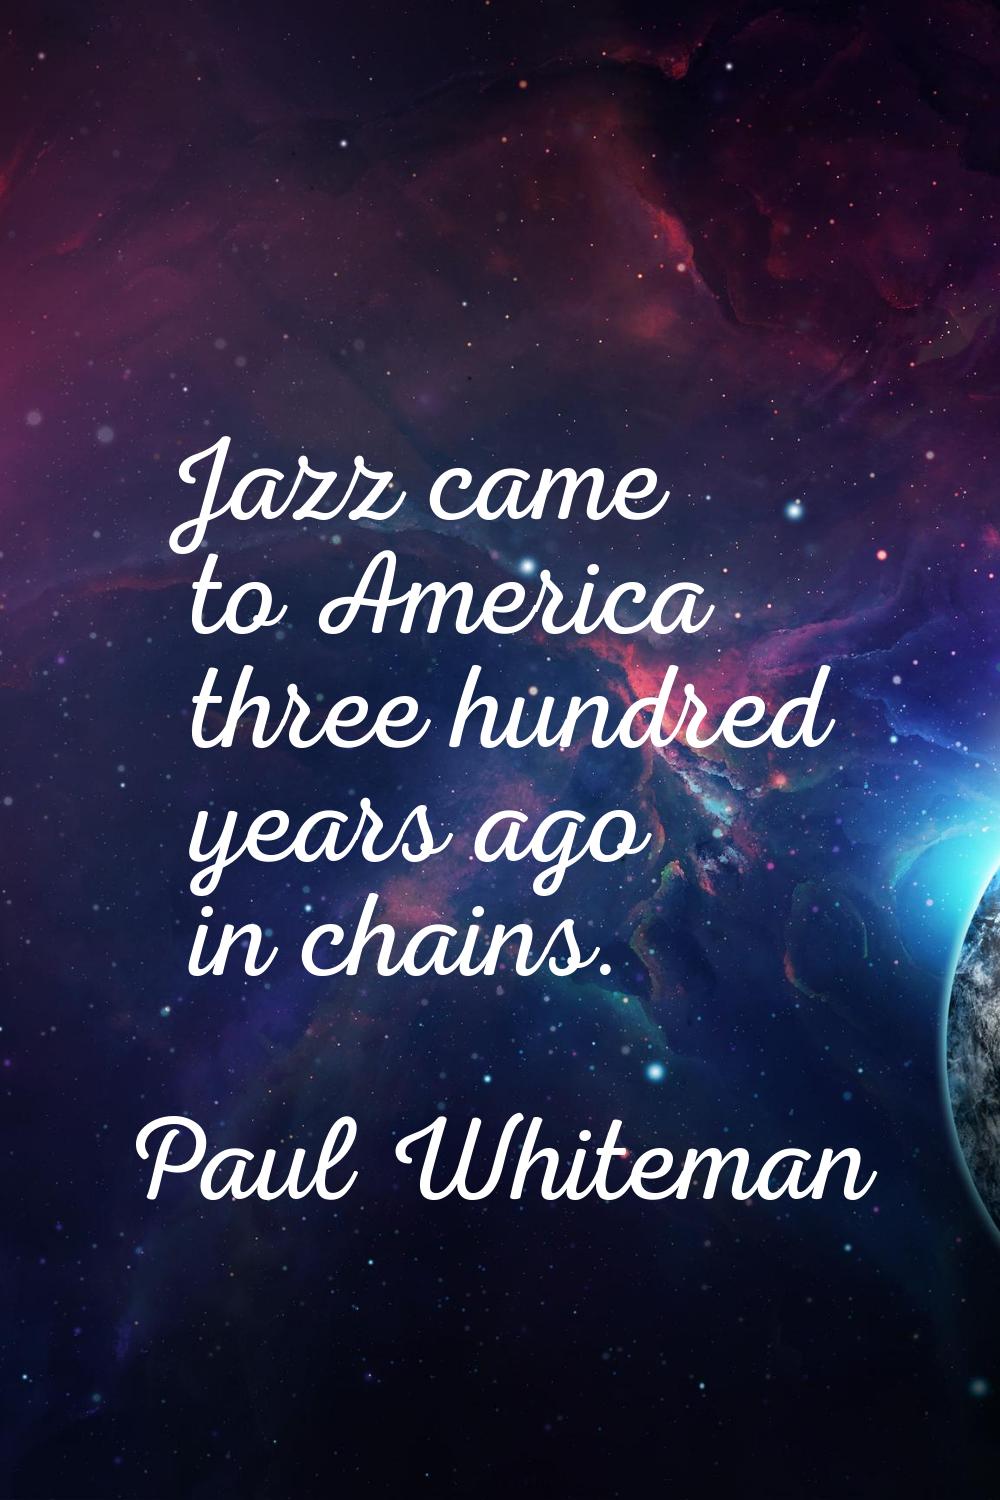 Jazz came to America three hundred years ago in chains.